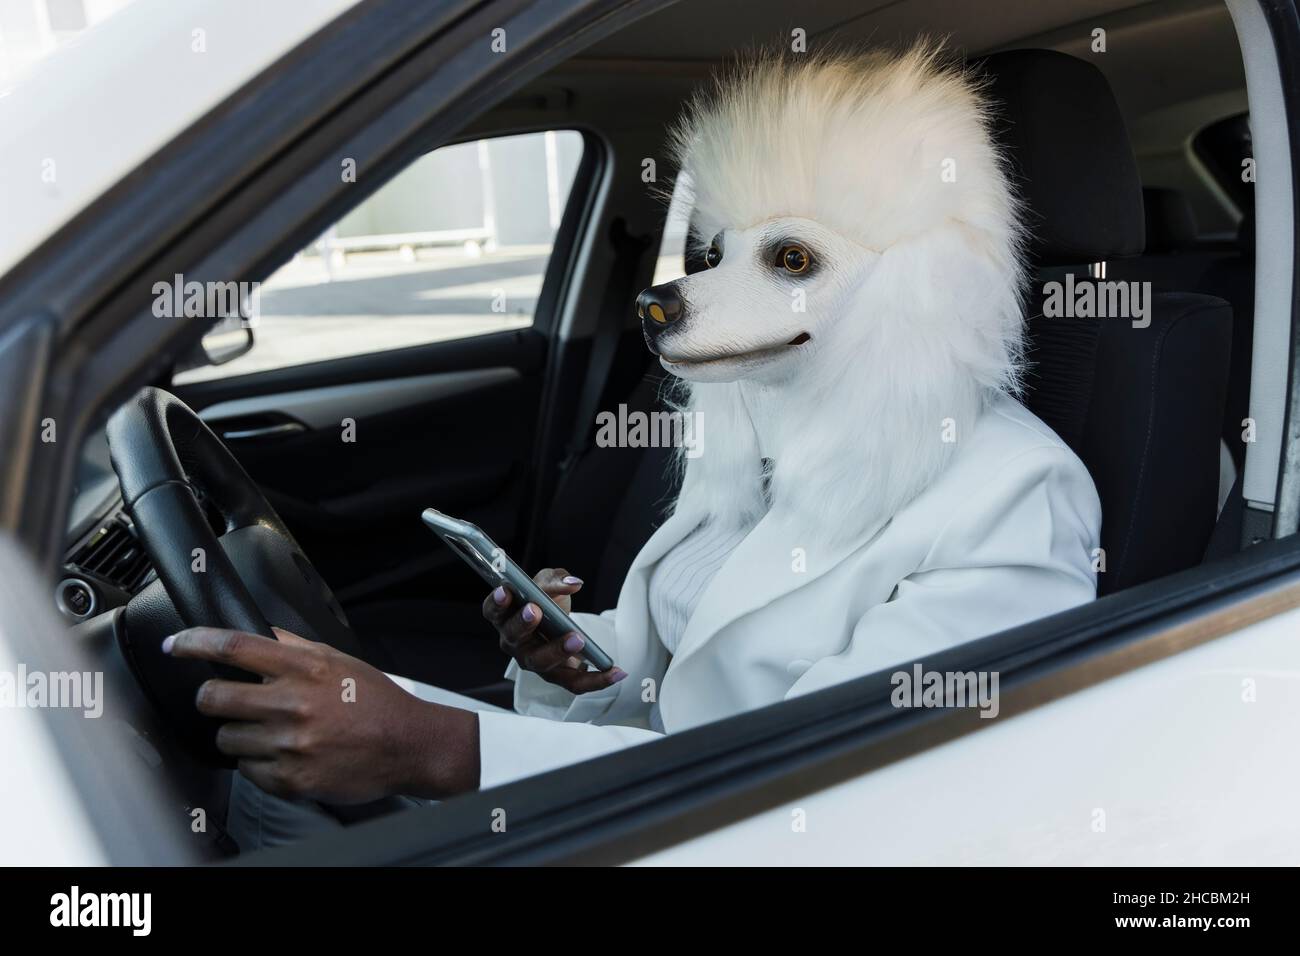 Woman wearing white dog mask using mobile phone in car Stock Photo